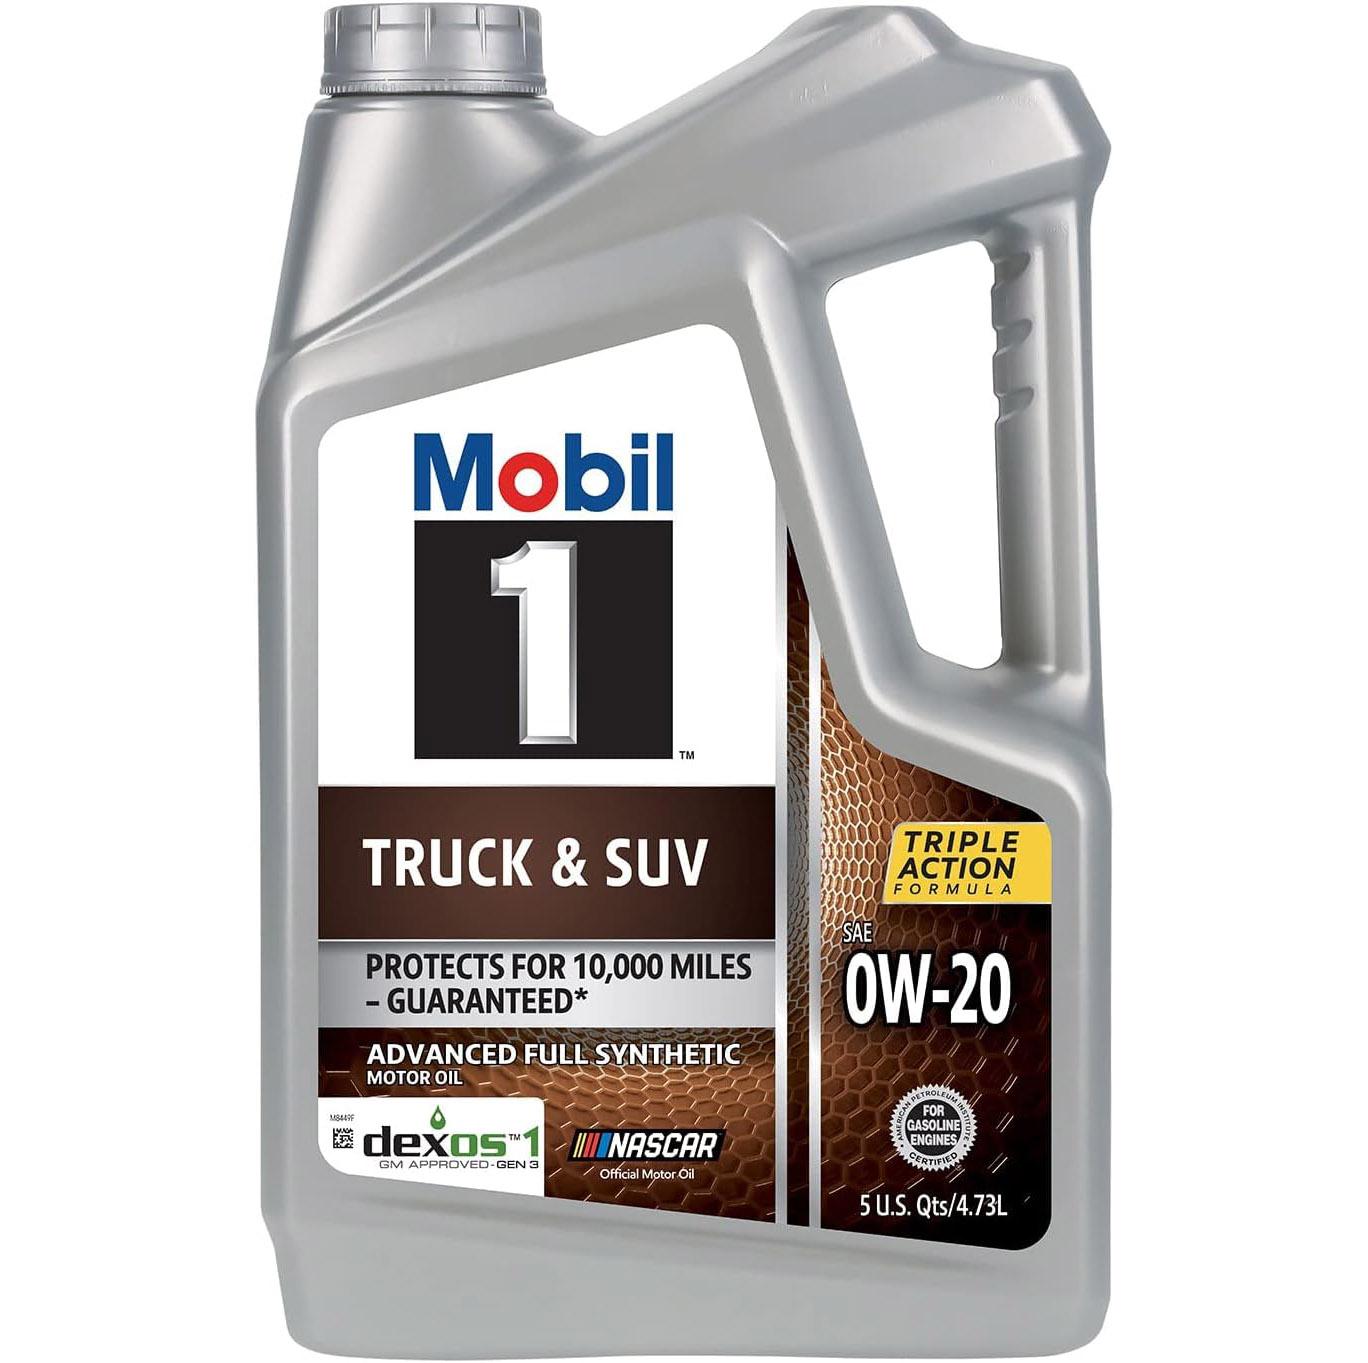 Mobil 1 Truck and SUV Full Synthetic Motor Oil 0W-20 5-Quarts for $21.29